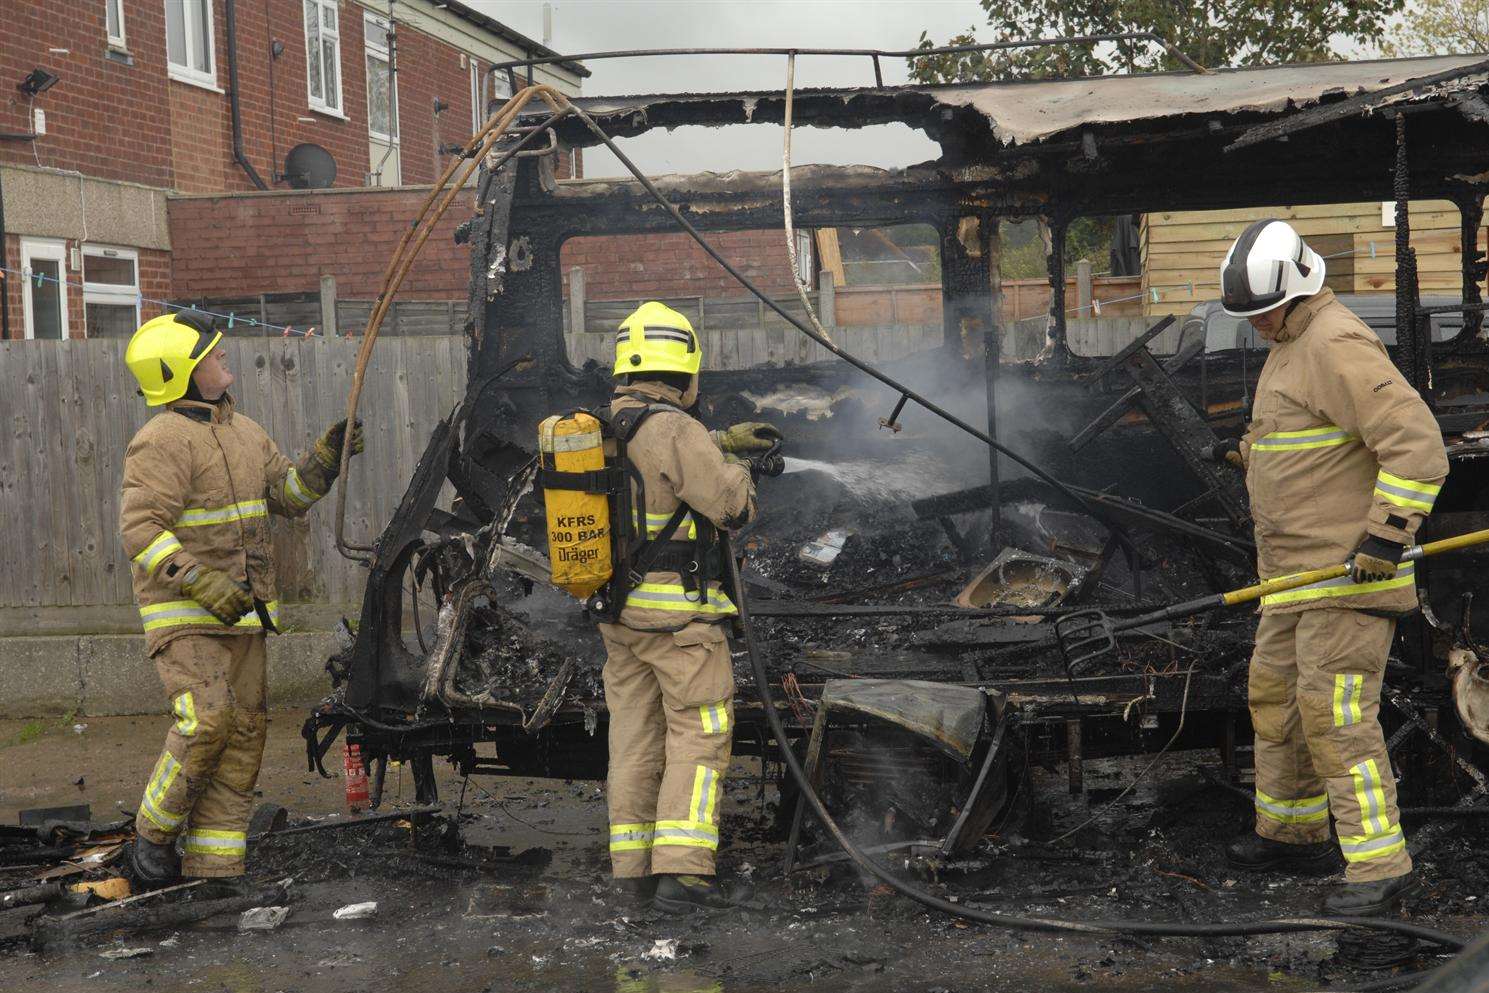 Crews spent almost an hour tackling the blaze